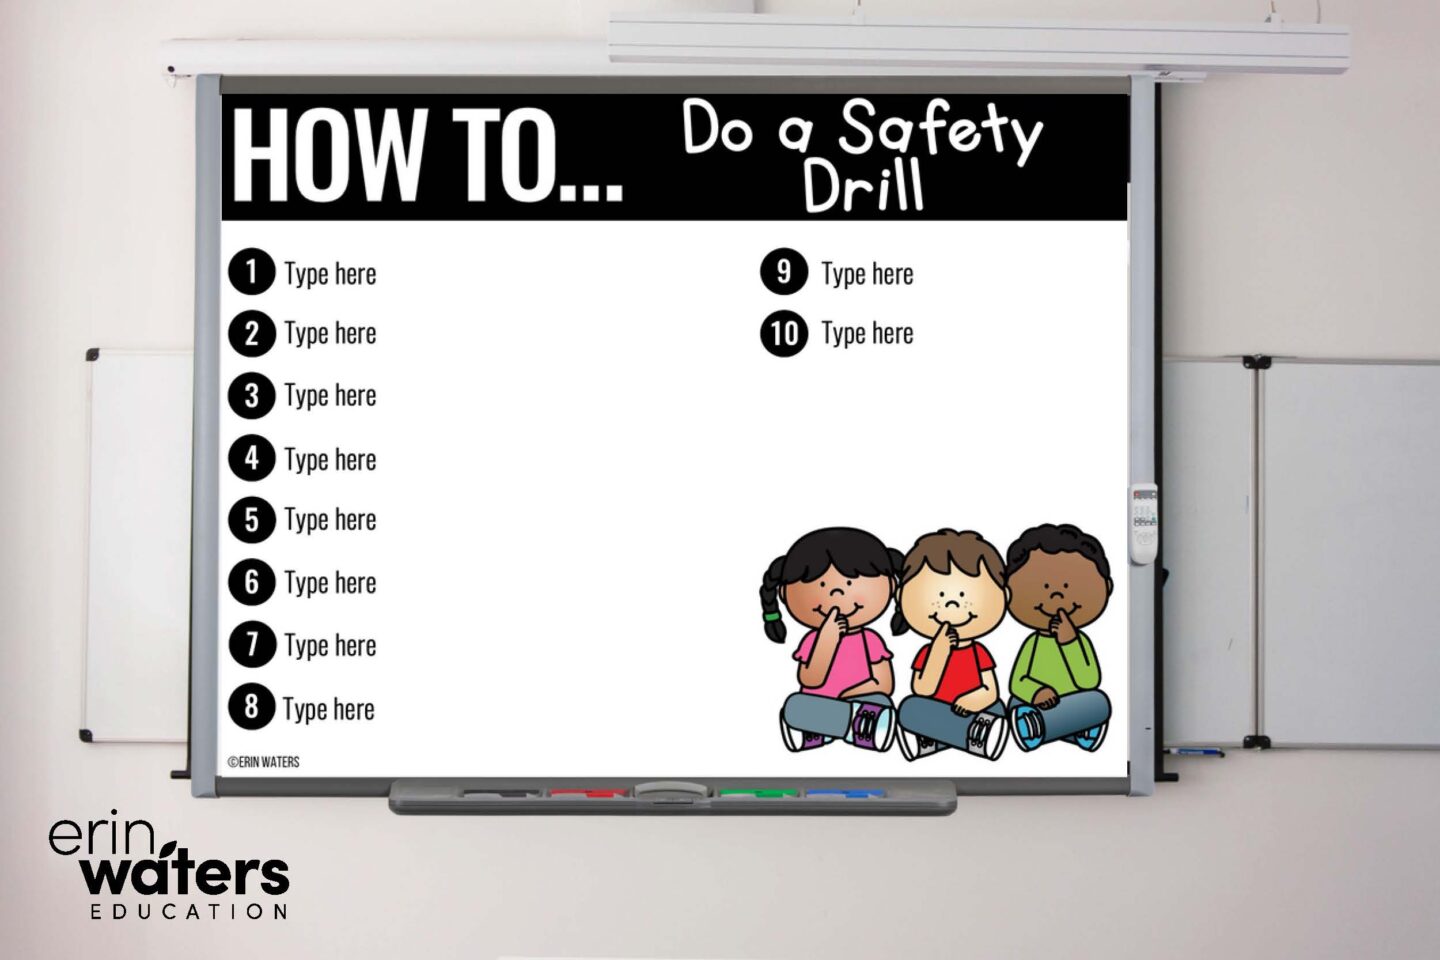 teacher toolkit slide example showing how to to do a classroom procedure (in this case, a safety drill)